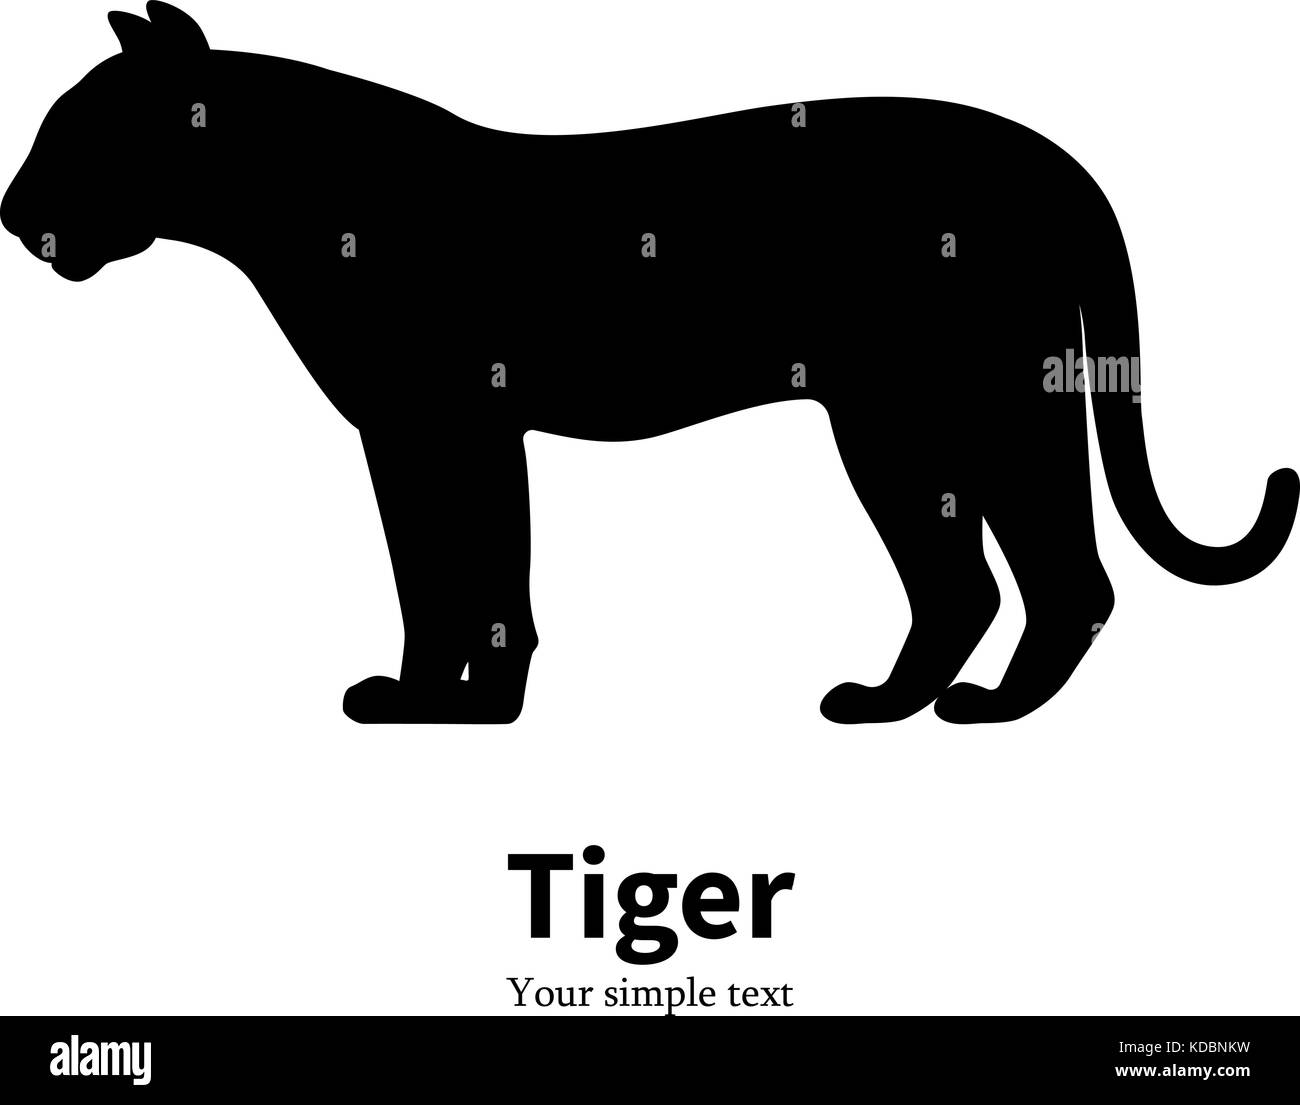 Vector illustration of black silhouette of a tiger Stock Vector